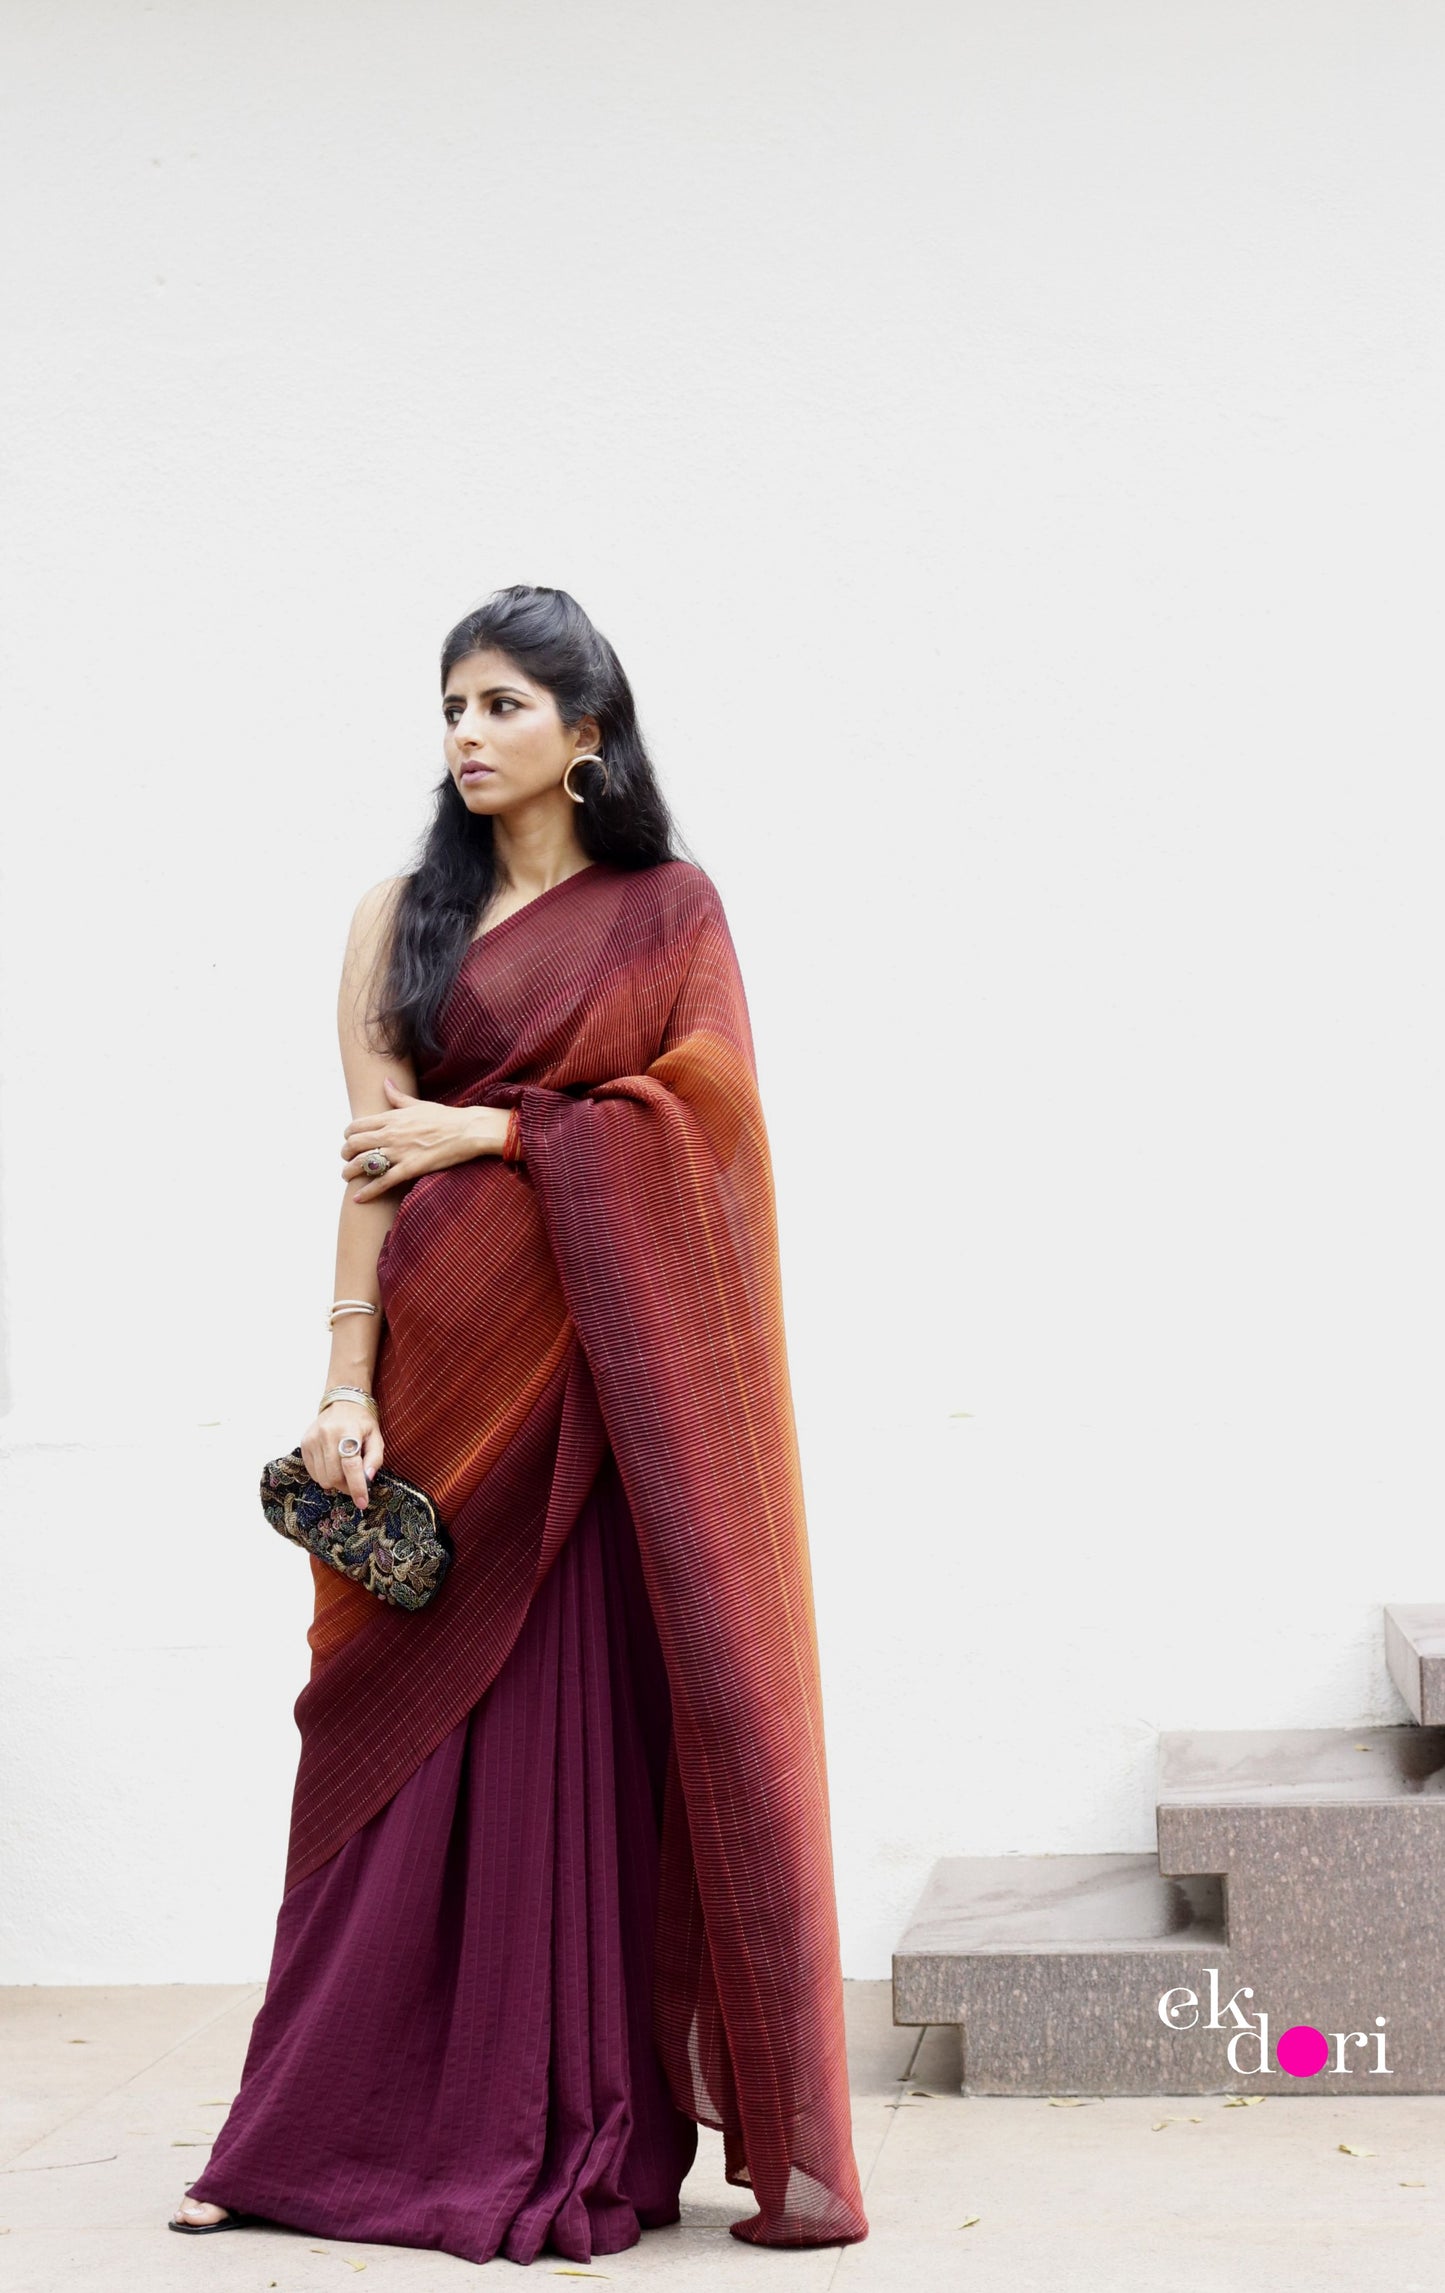 'Rust and Rose' Statement Shaded Micropleated : Fun Cocktail Saree Collection